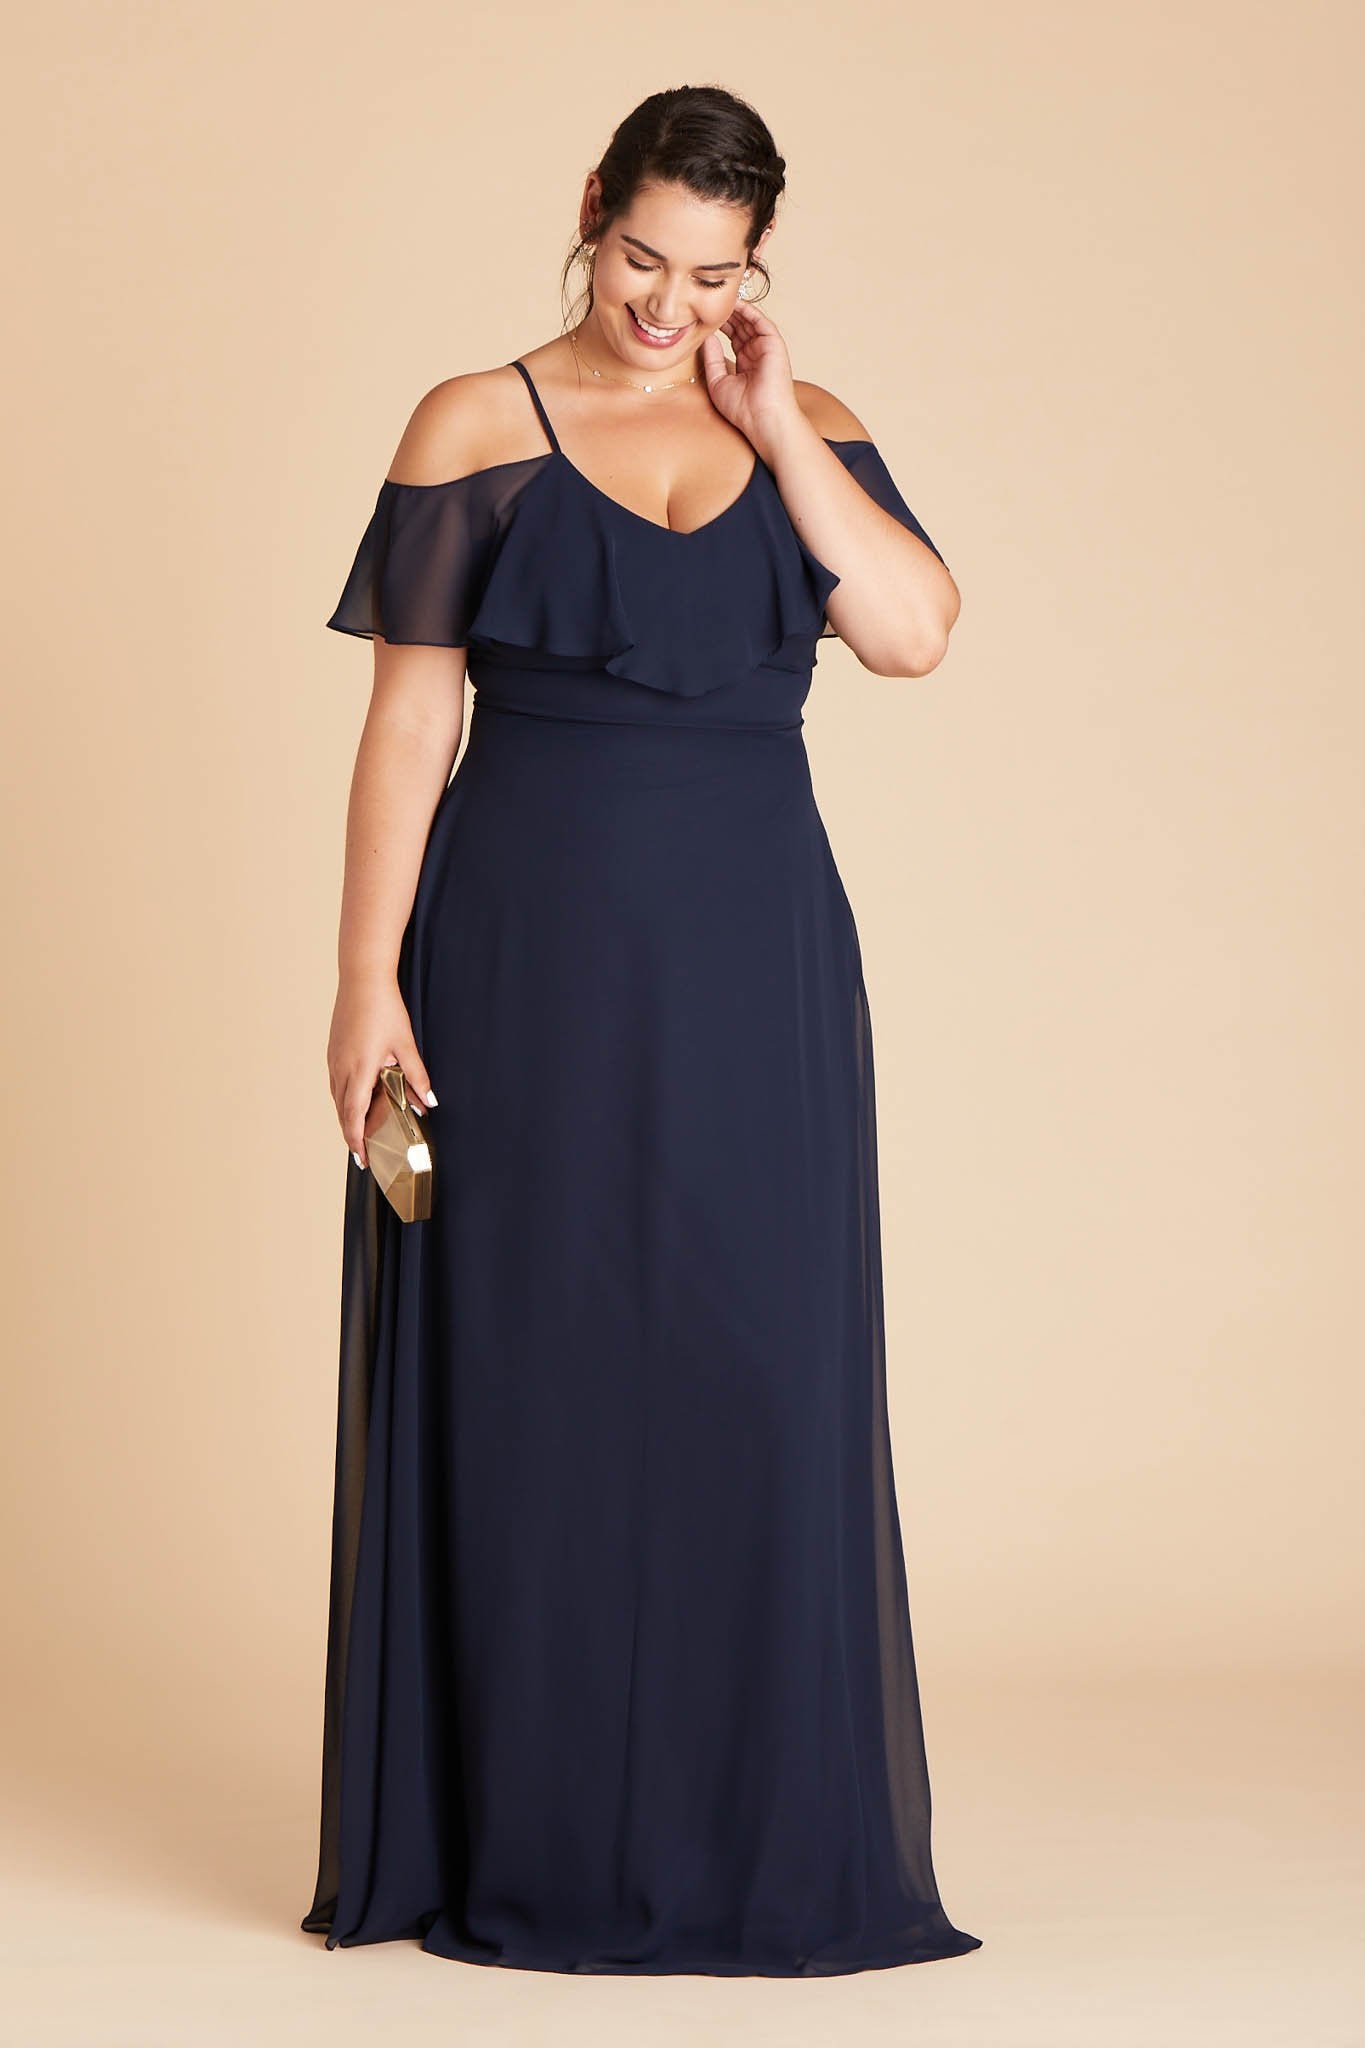 Jane convertible plus size bridesmaid dress in navy blue chiffon by Birdy Grey, front view